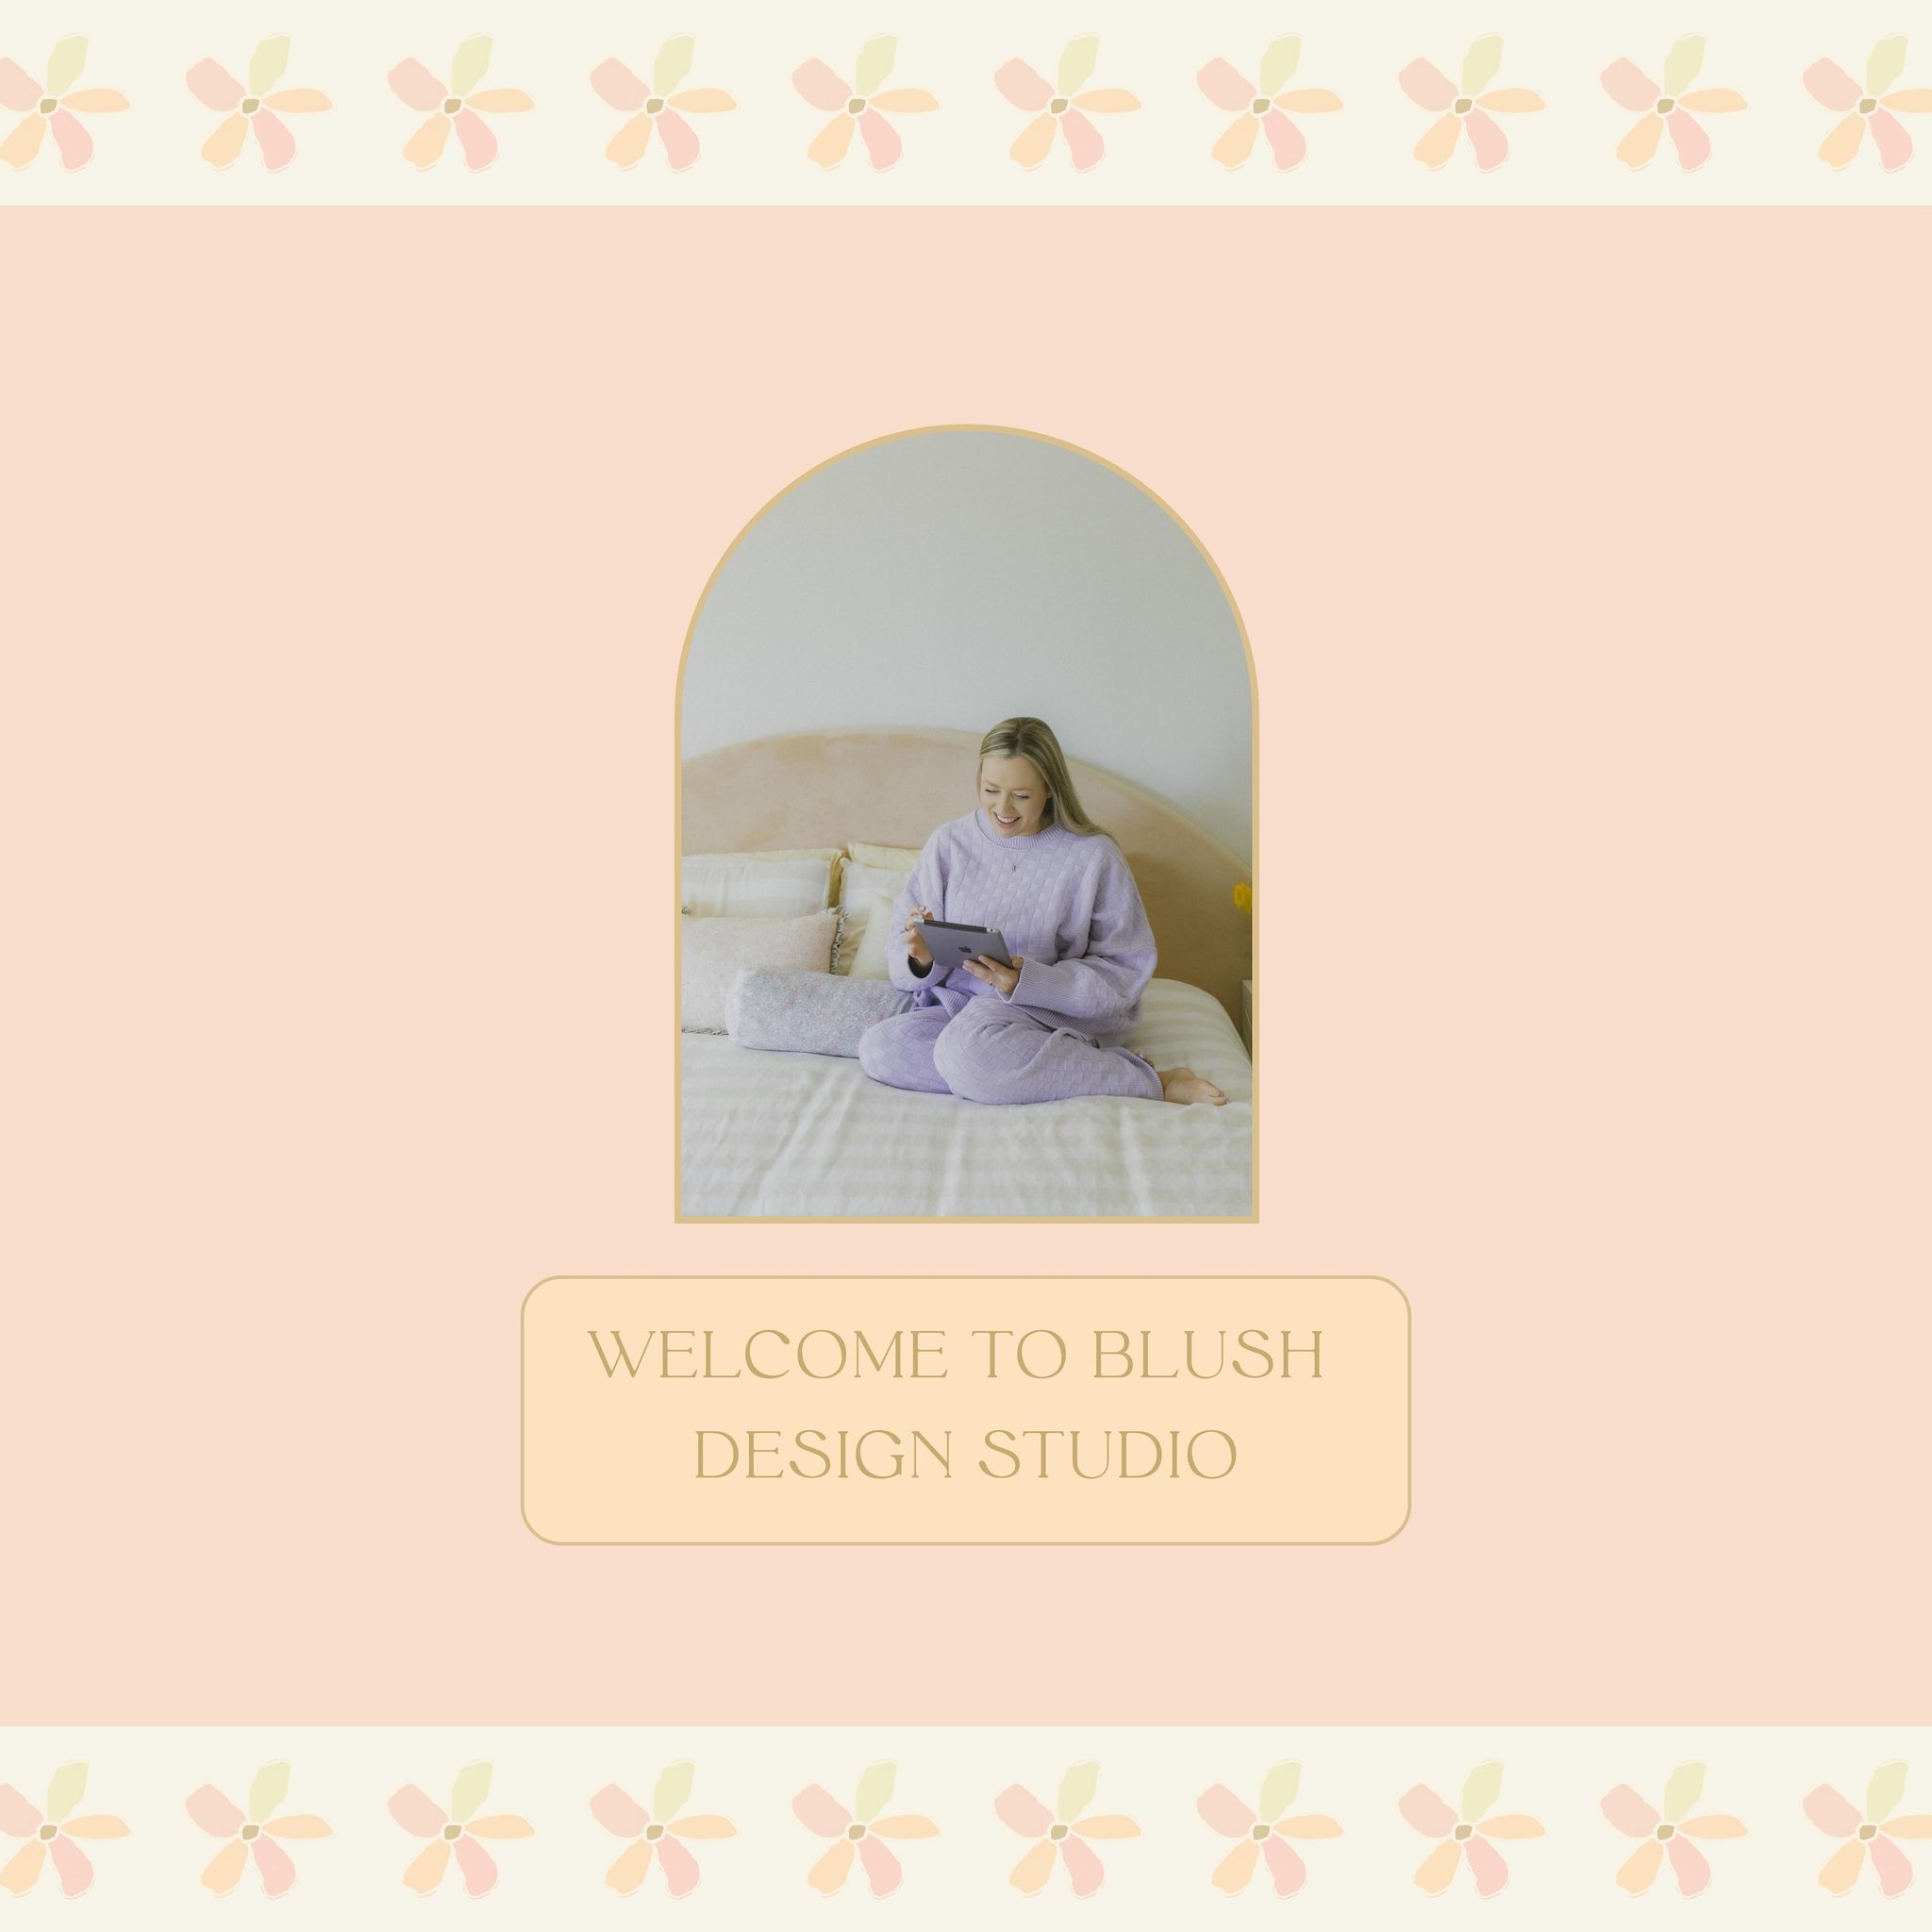 Welcome to Blush Design Studio! Thank you so much for following along this journey with me. If you are interested in working together in 2024, please do get in touch as I am currently booking out months ahead. At this stage, I am fully booked until t